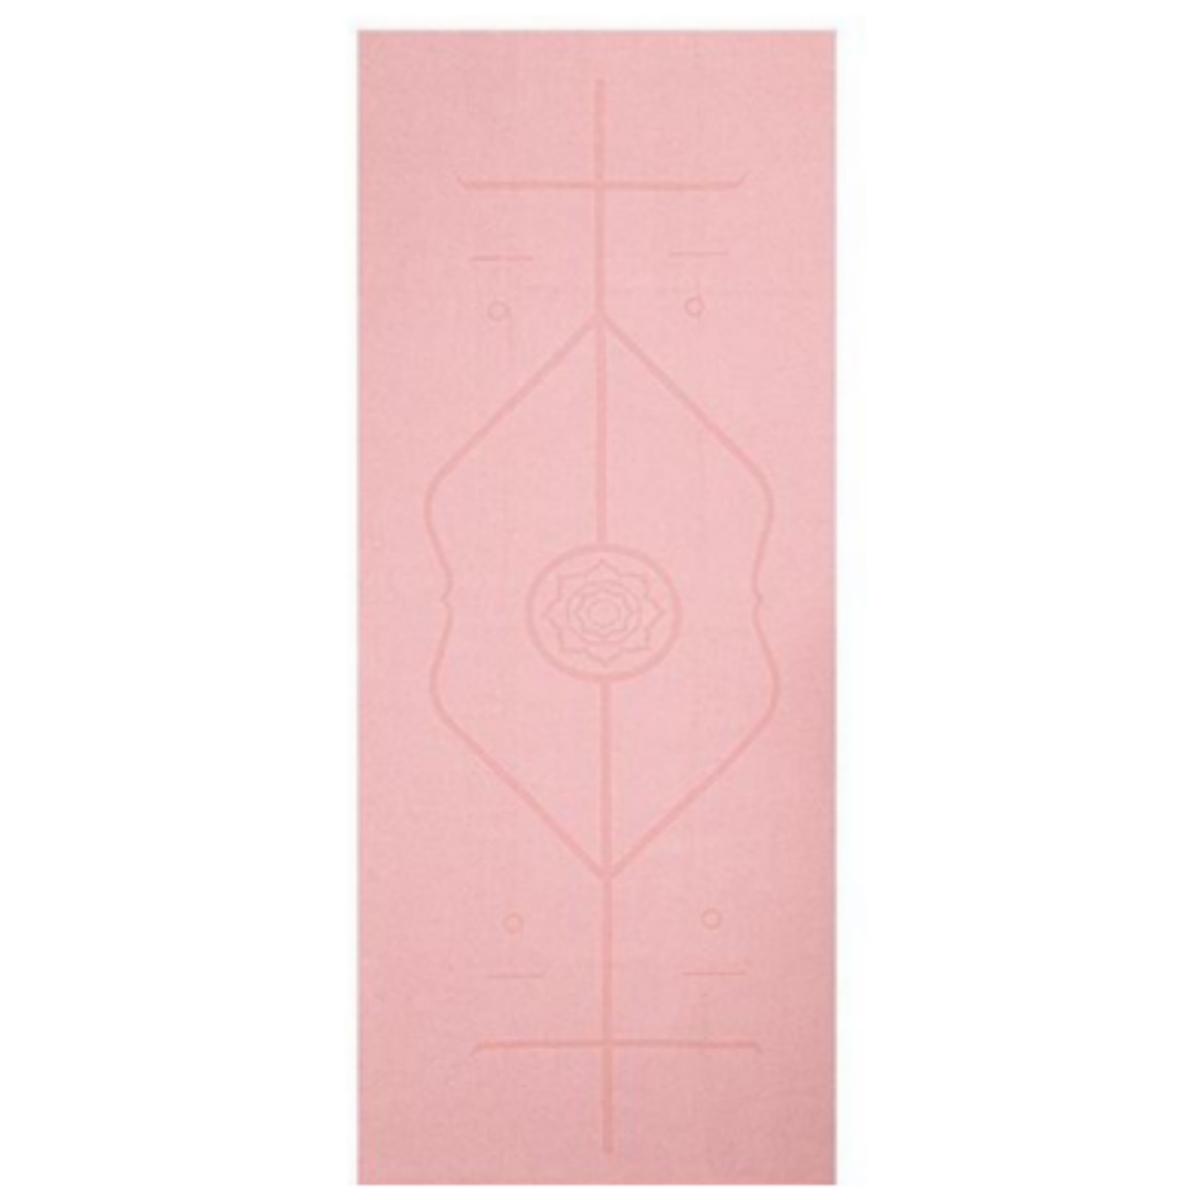 Picture of JupiterGear JG-YOGATWL-ALIGN-PNK Yoga Mat Towel with Slip-Resistant Fabric and Posture Alignment Lines - Pink